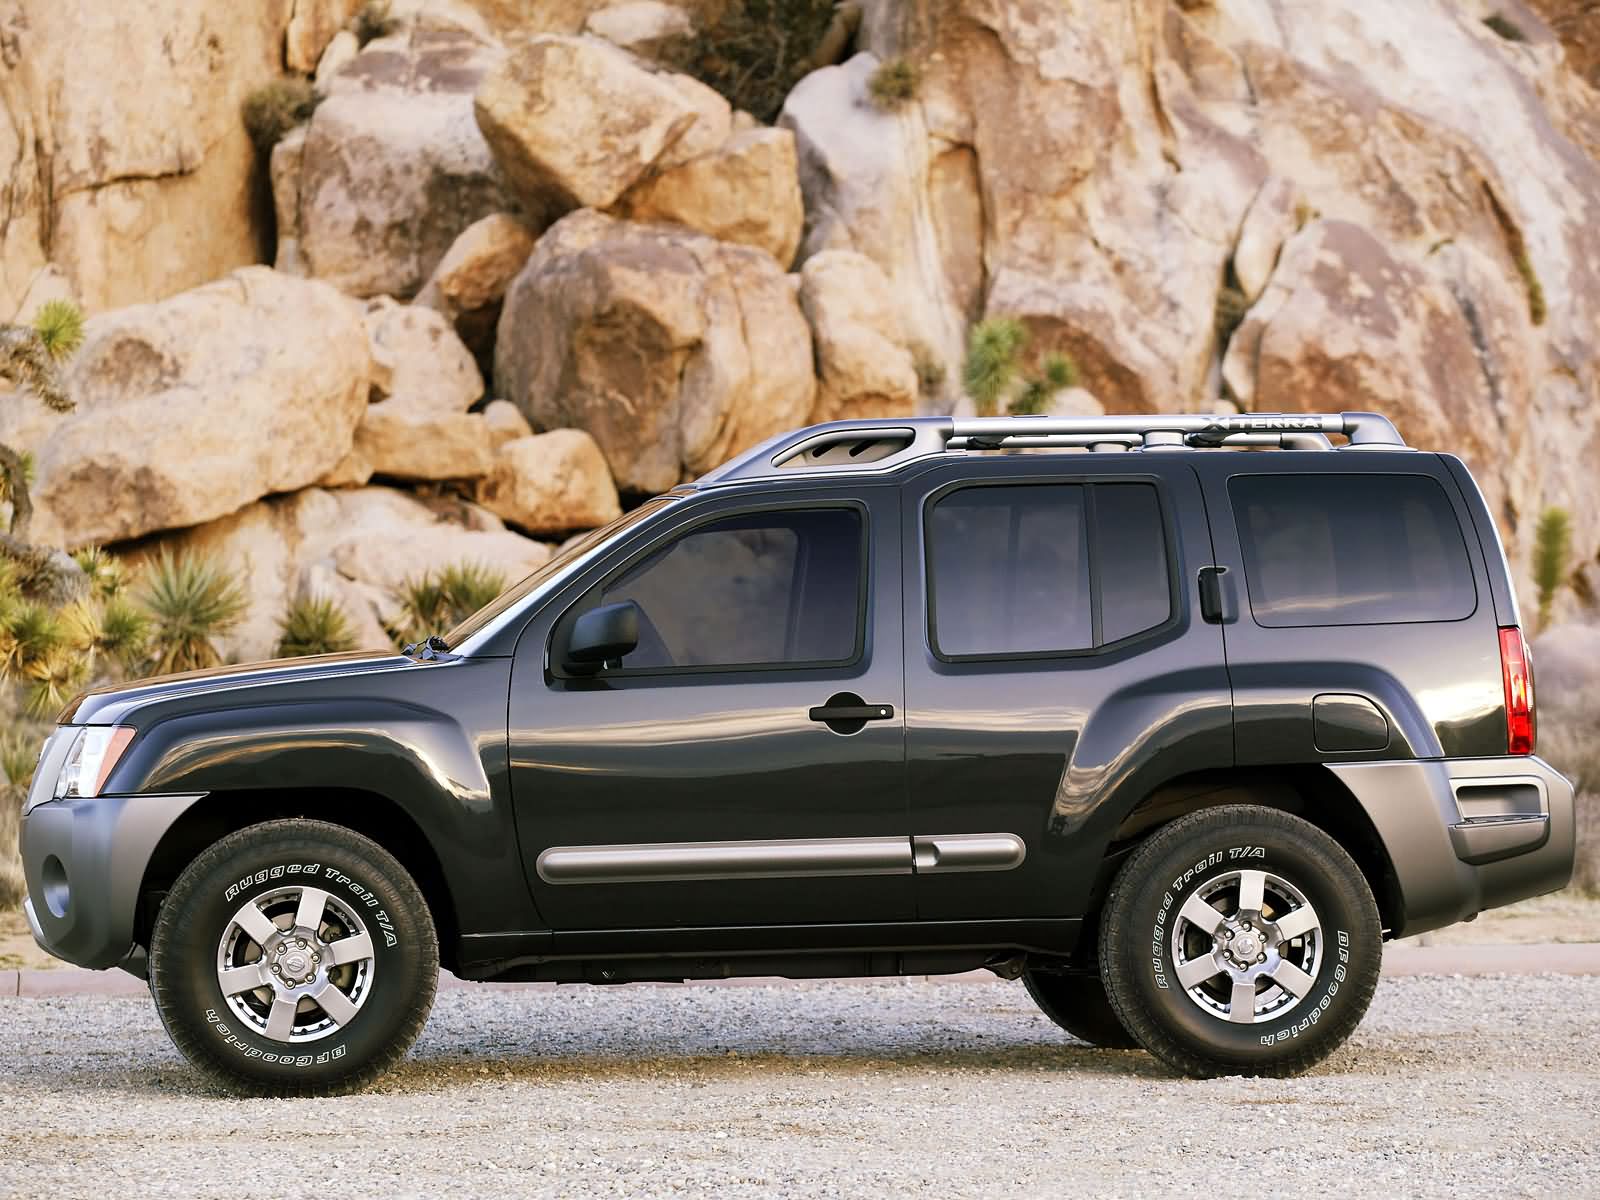 You can vote for this Nissan Xterra photo